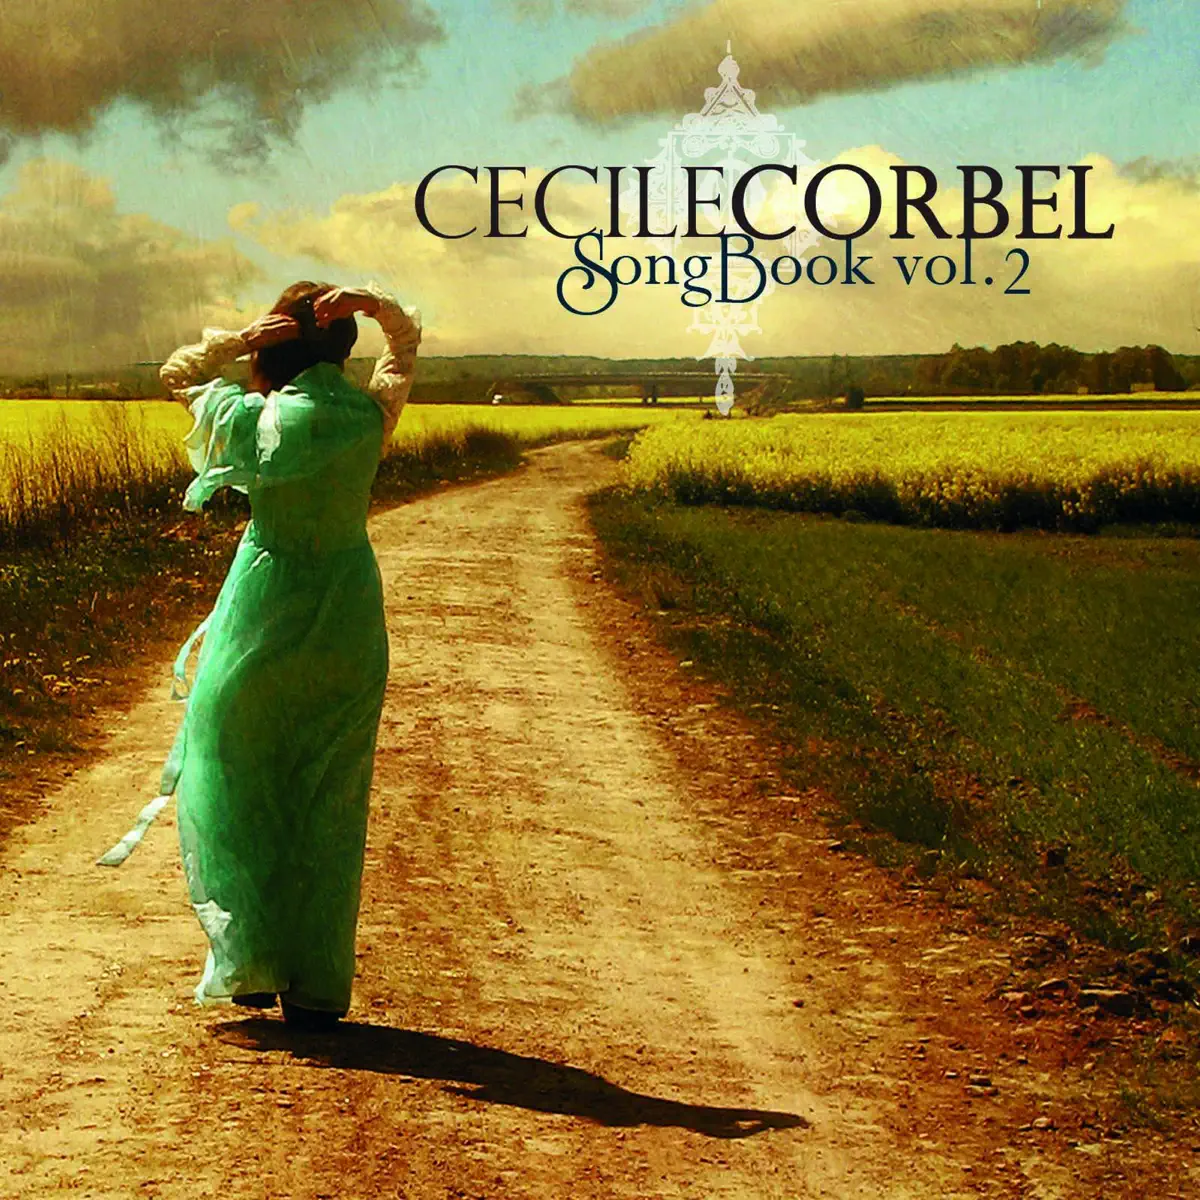 Cecile Corbel - SongBook, Vol. 2 (2008) [iTunes Plus AAC M4A]-新房子